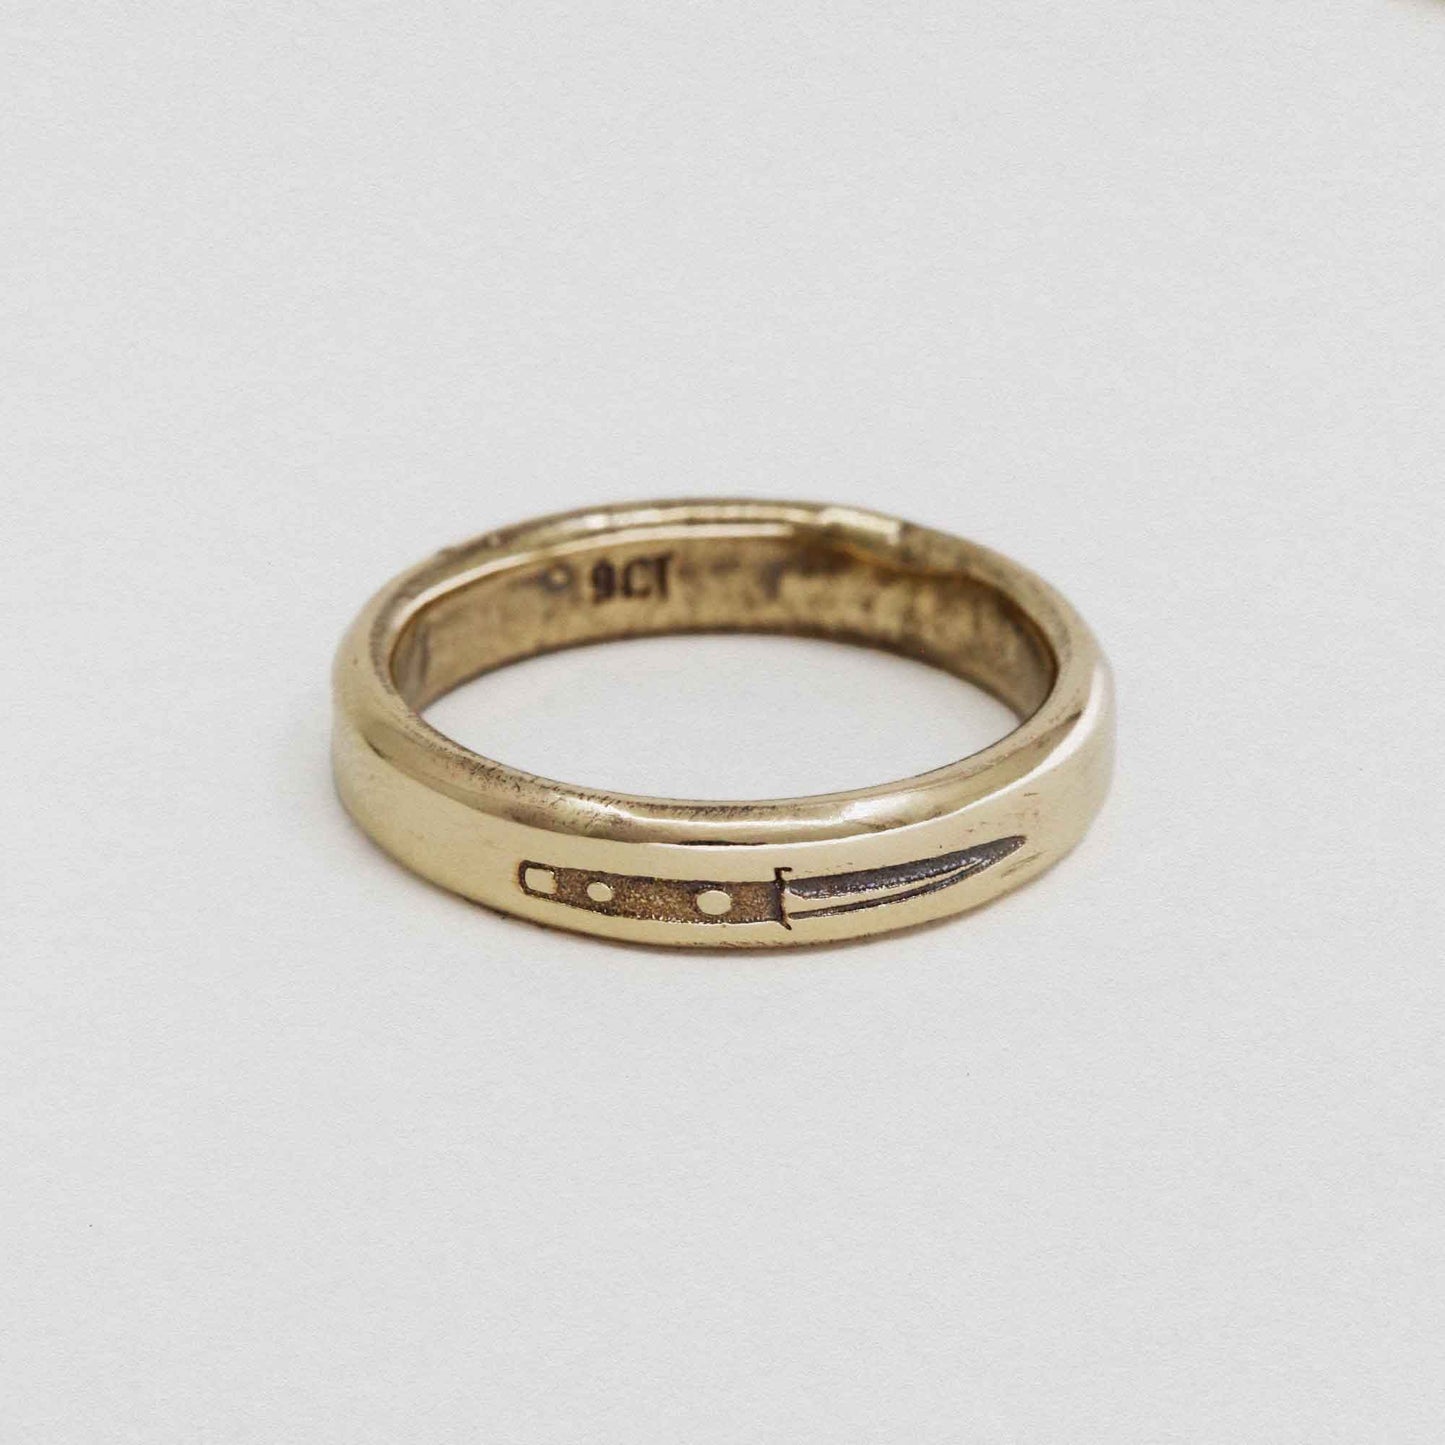 Dagger Engraved On 9ct Gold Ring